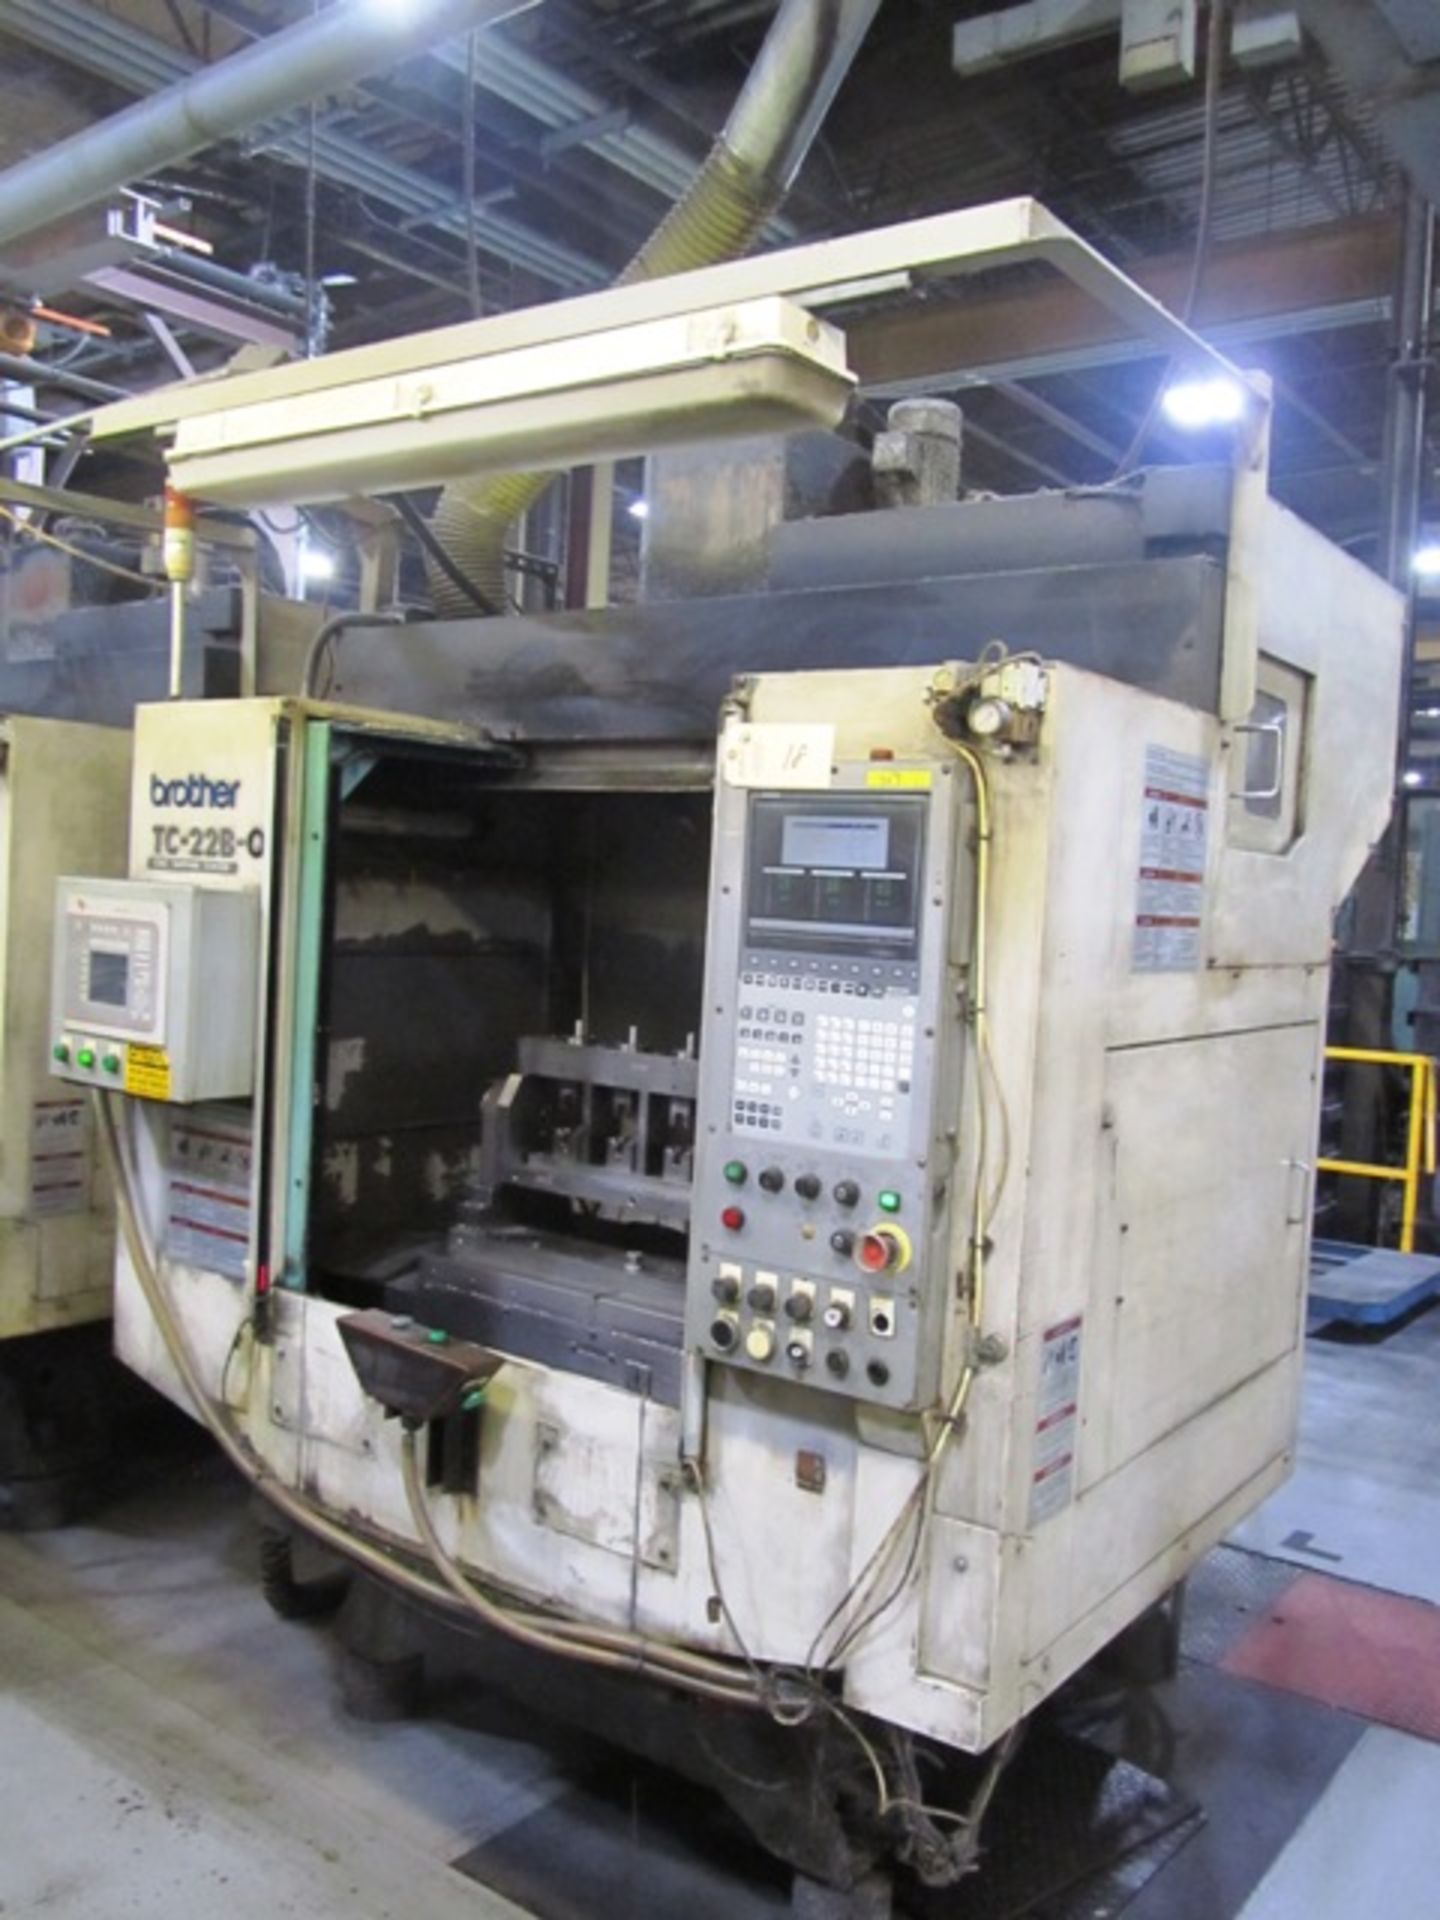 Brother TC22B-0 4-Axis CNC Tapping & Machining Center - Image 4 of 4